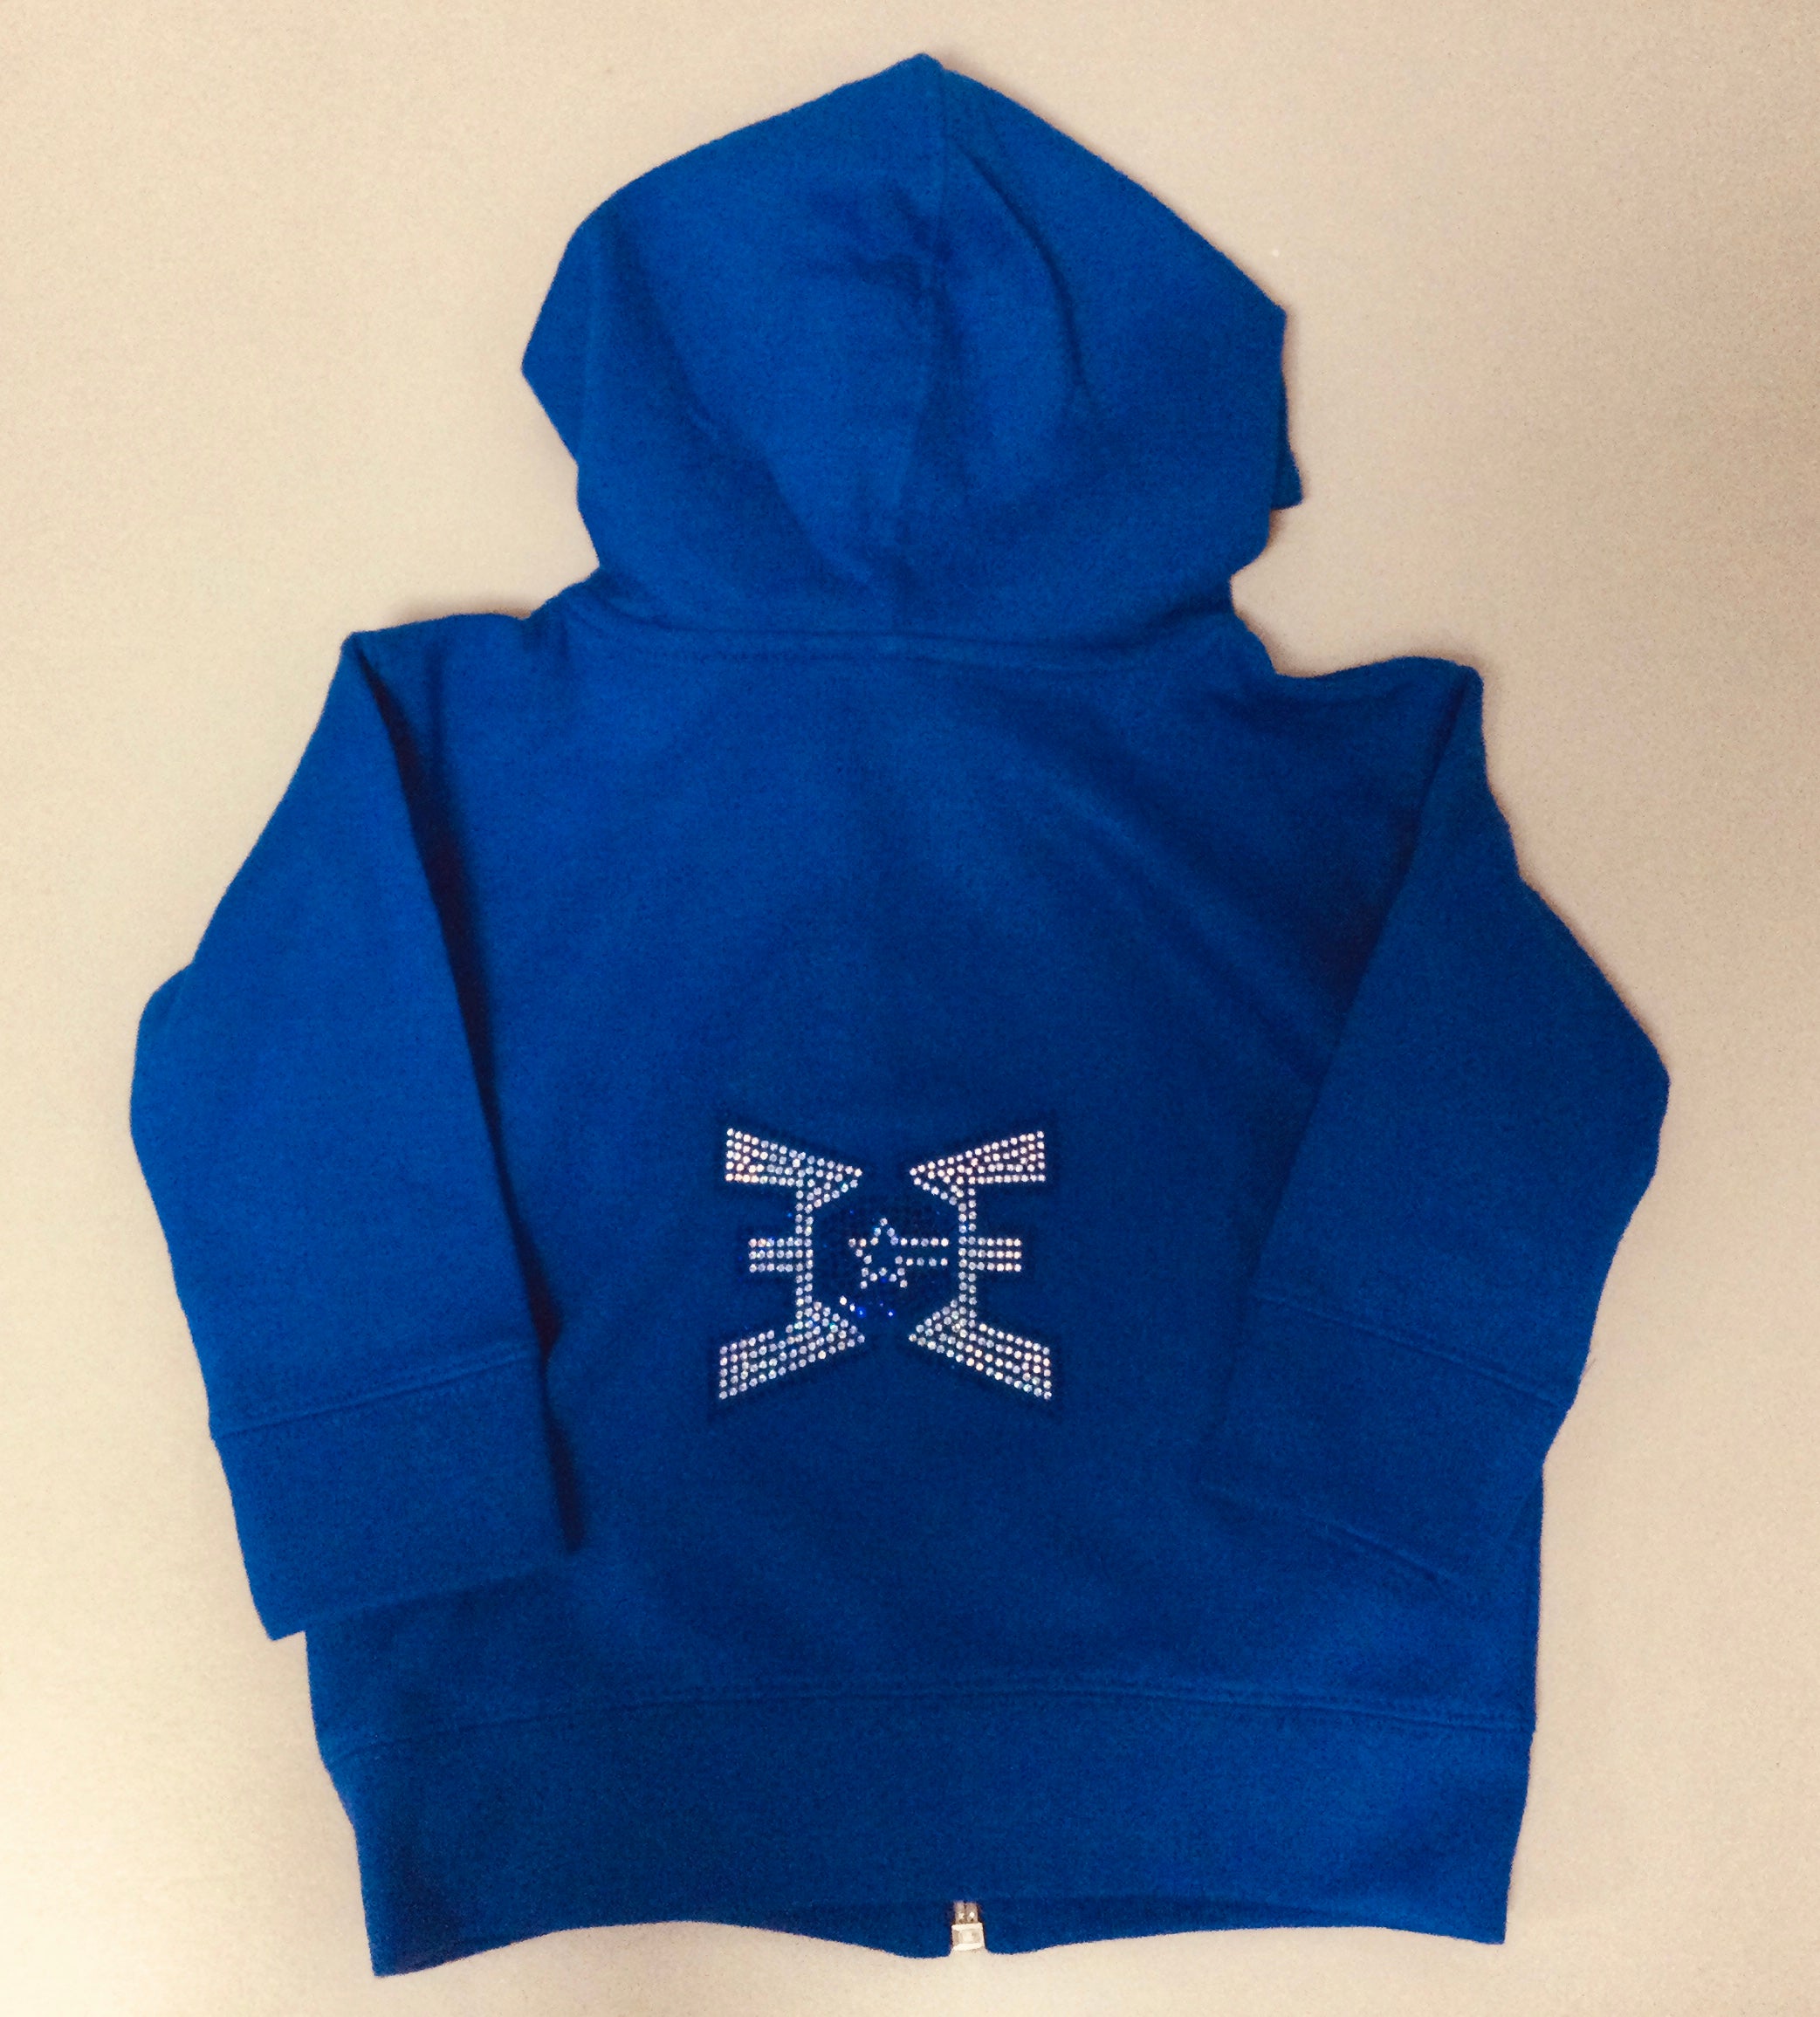 Baby Zip Up Hooded Sweatshirt Blue with Bling Logo